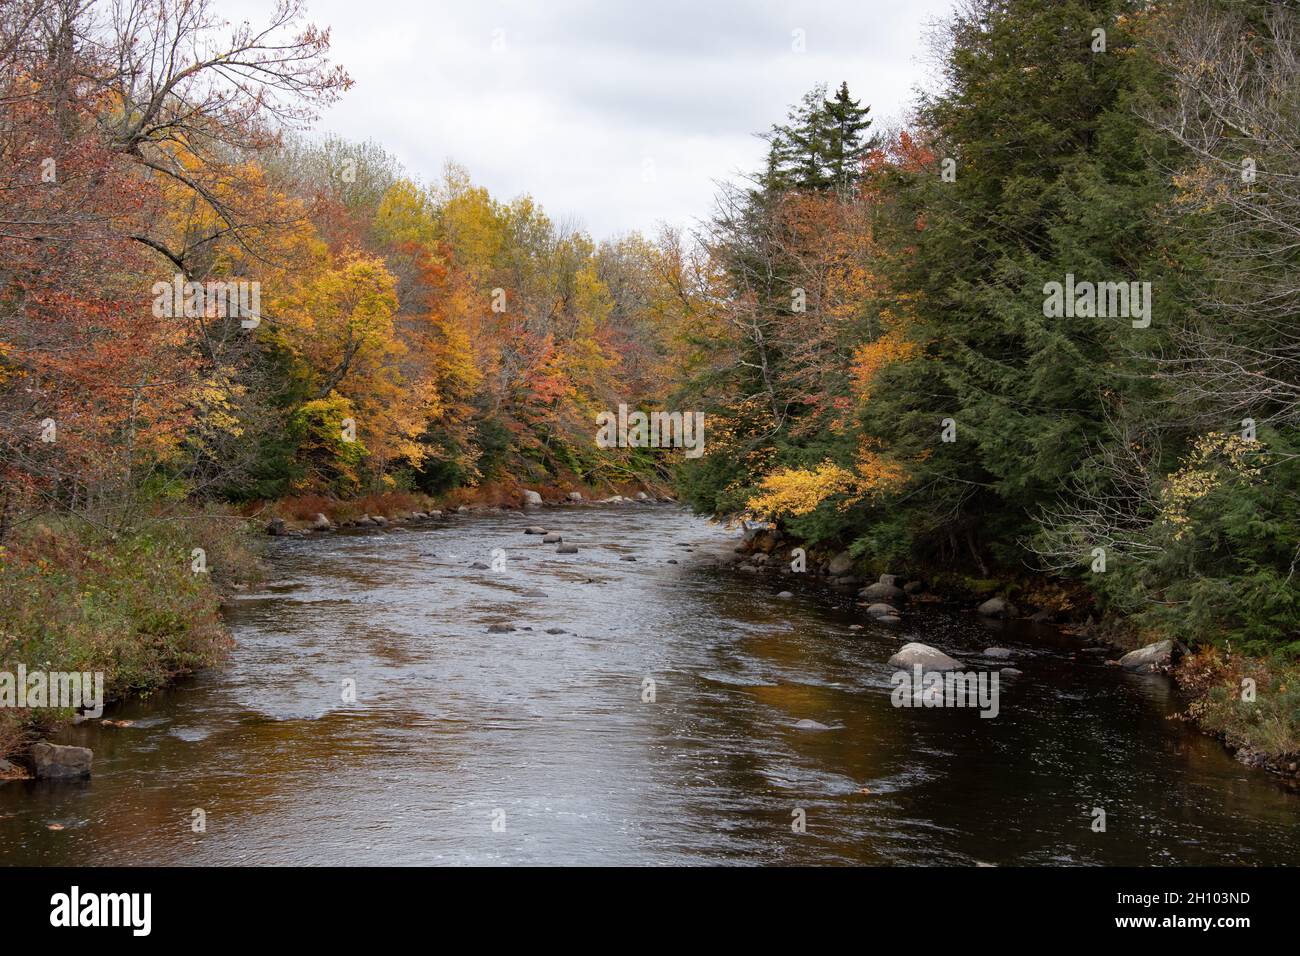 A view of the Sacandaga River in the Adirondack Mountains, NY,  wilderness in autumn with fall foliage and color. Stock Photo